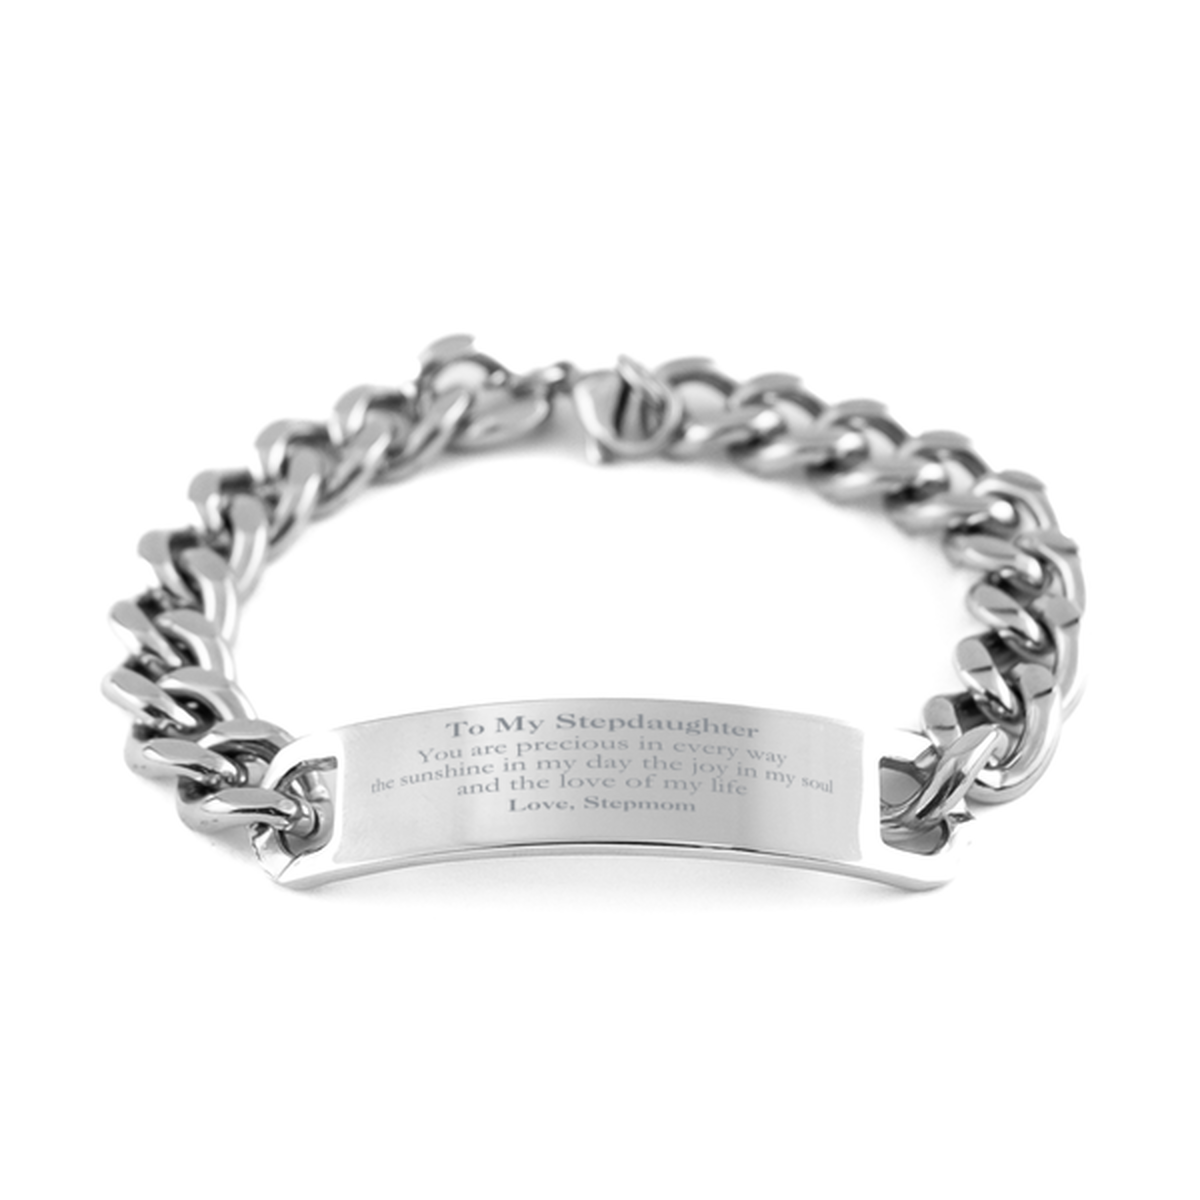 Graduation Gifts for Stepdaughter Cuban Chain Stainless Steel Bracelet Present from Stepmom, Christmas Stepdaughter Birthday Gifts Stepdaughter You are precious in every way the sunshine in my day. Love, Stepmom